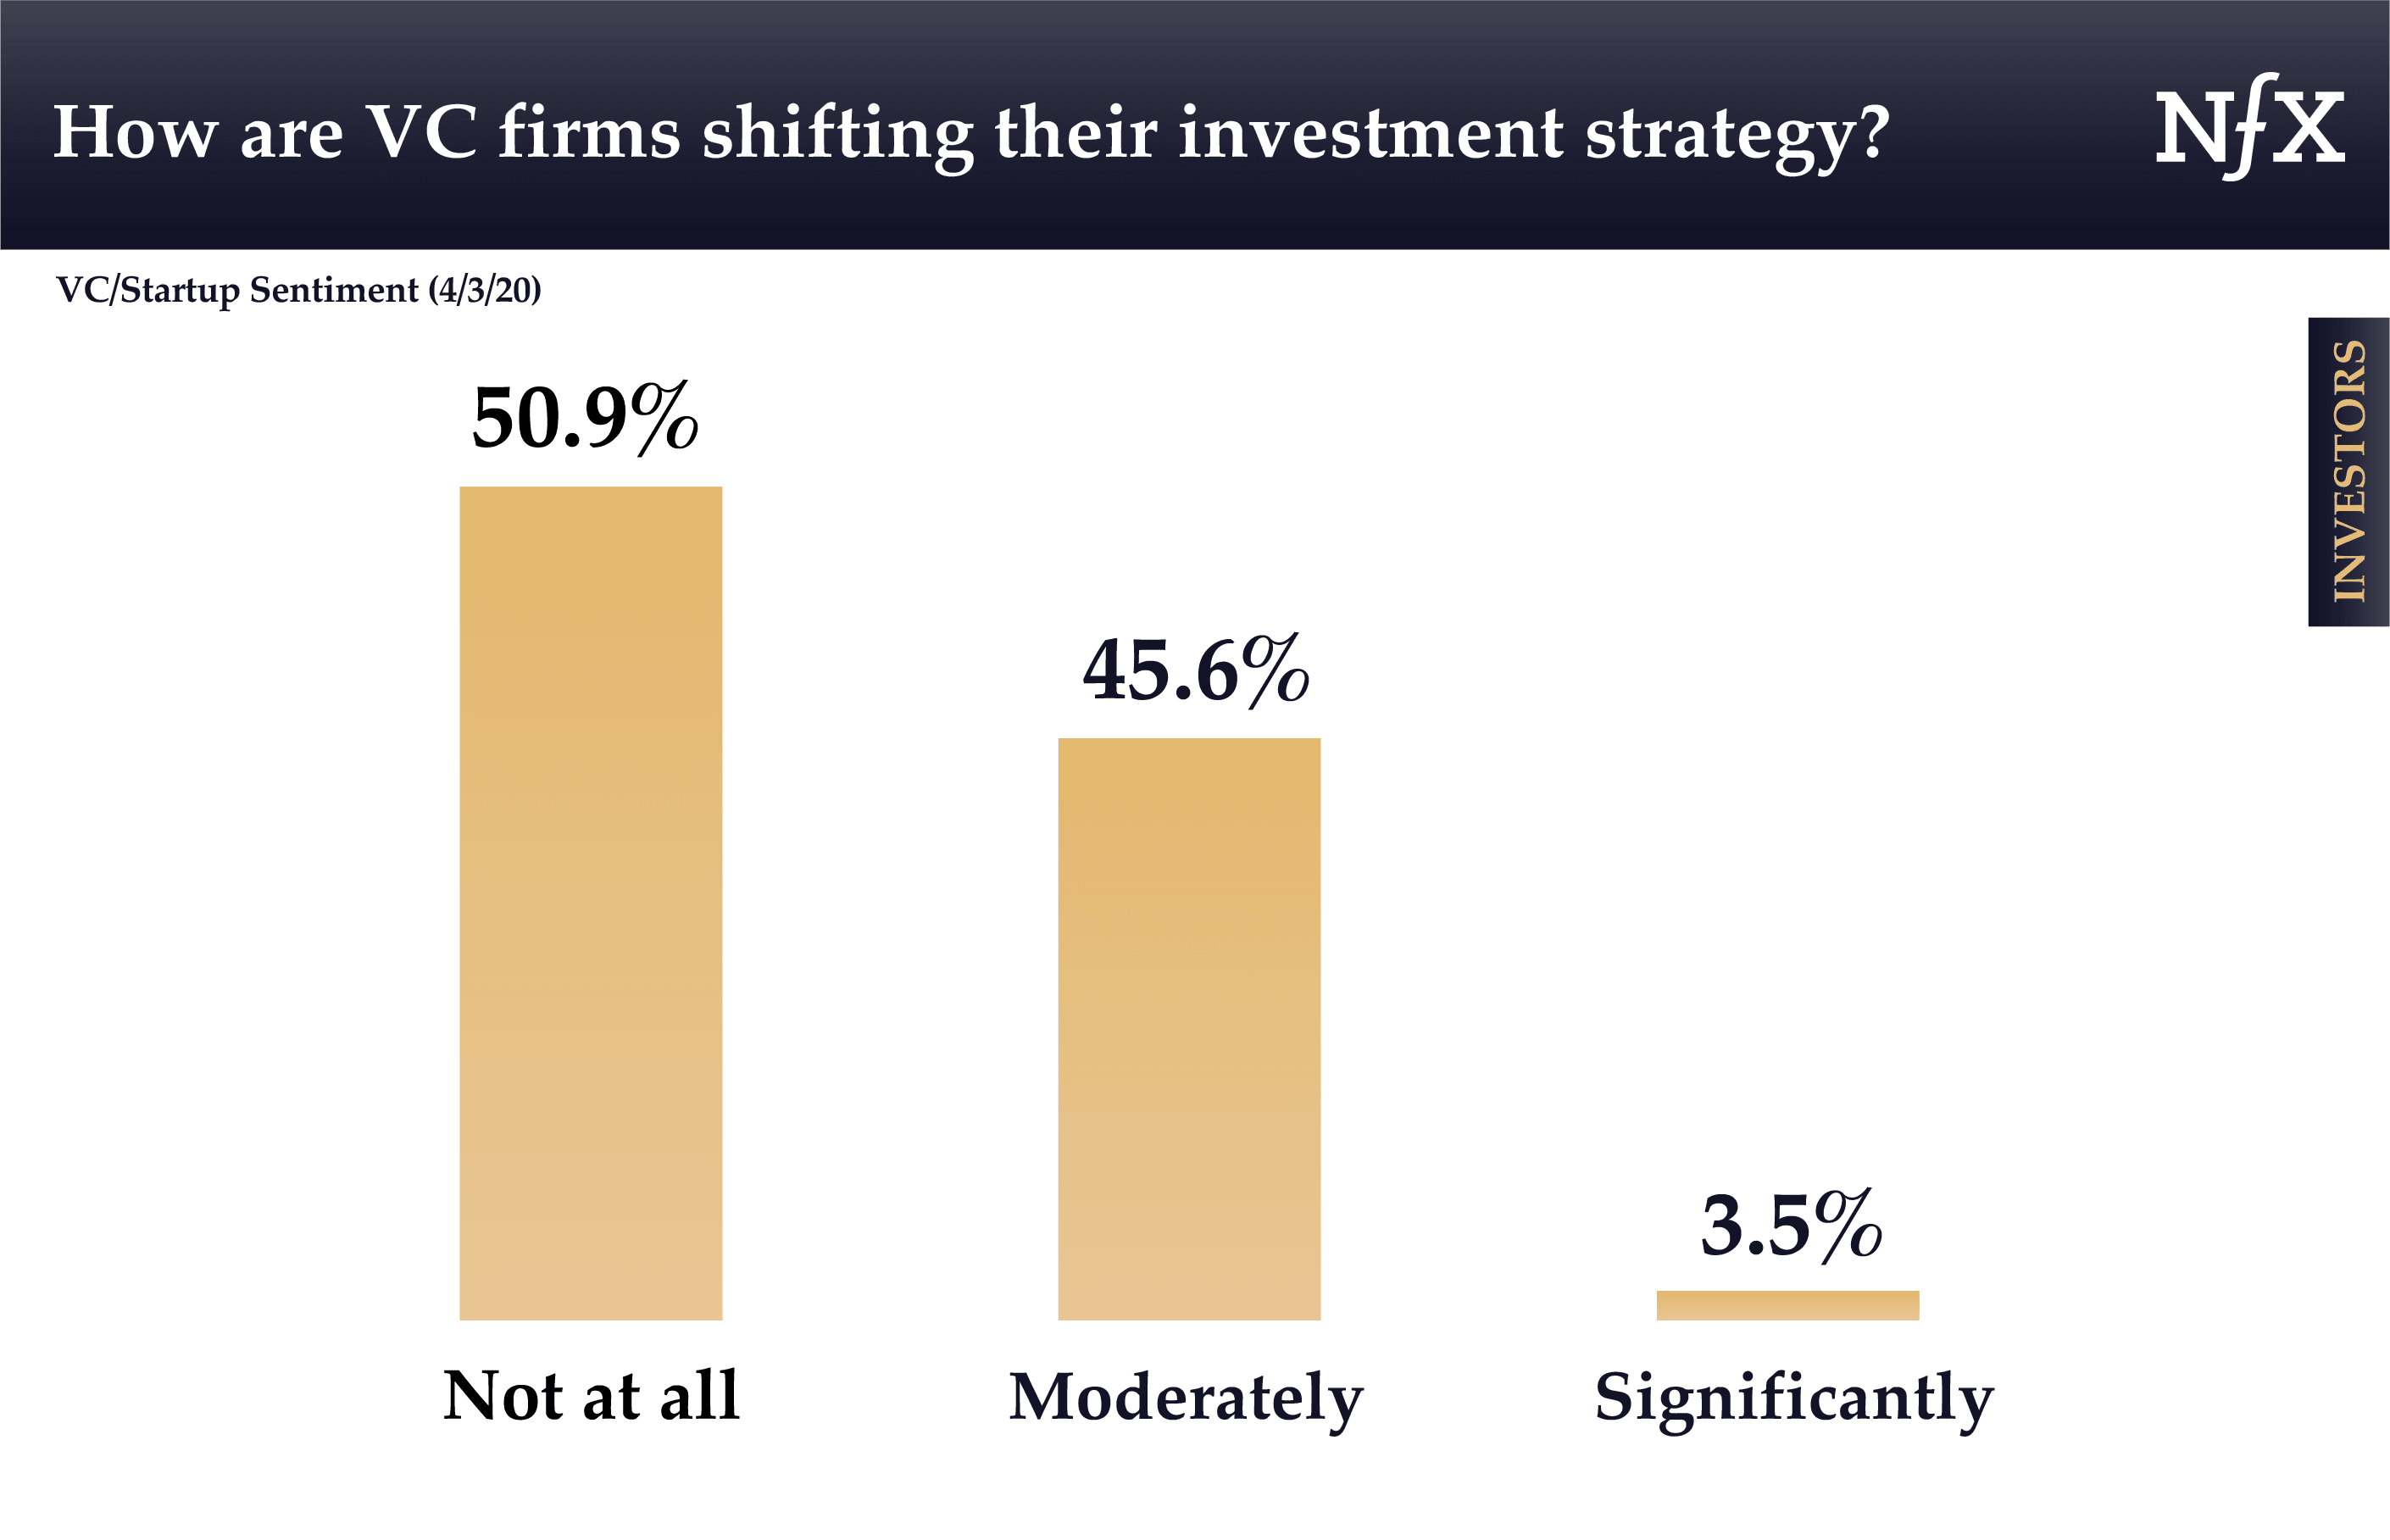 How VCs are shifting their investment strategies during COVID-19?